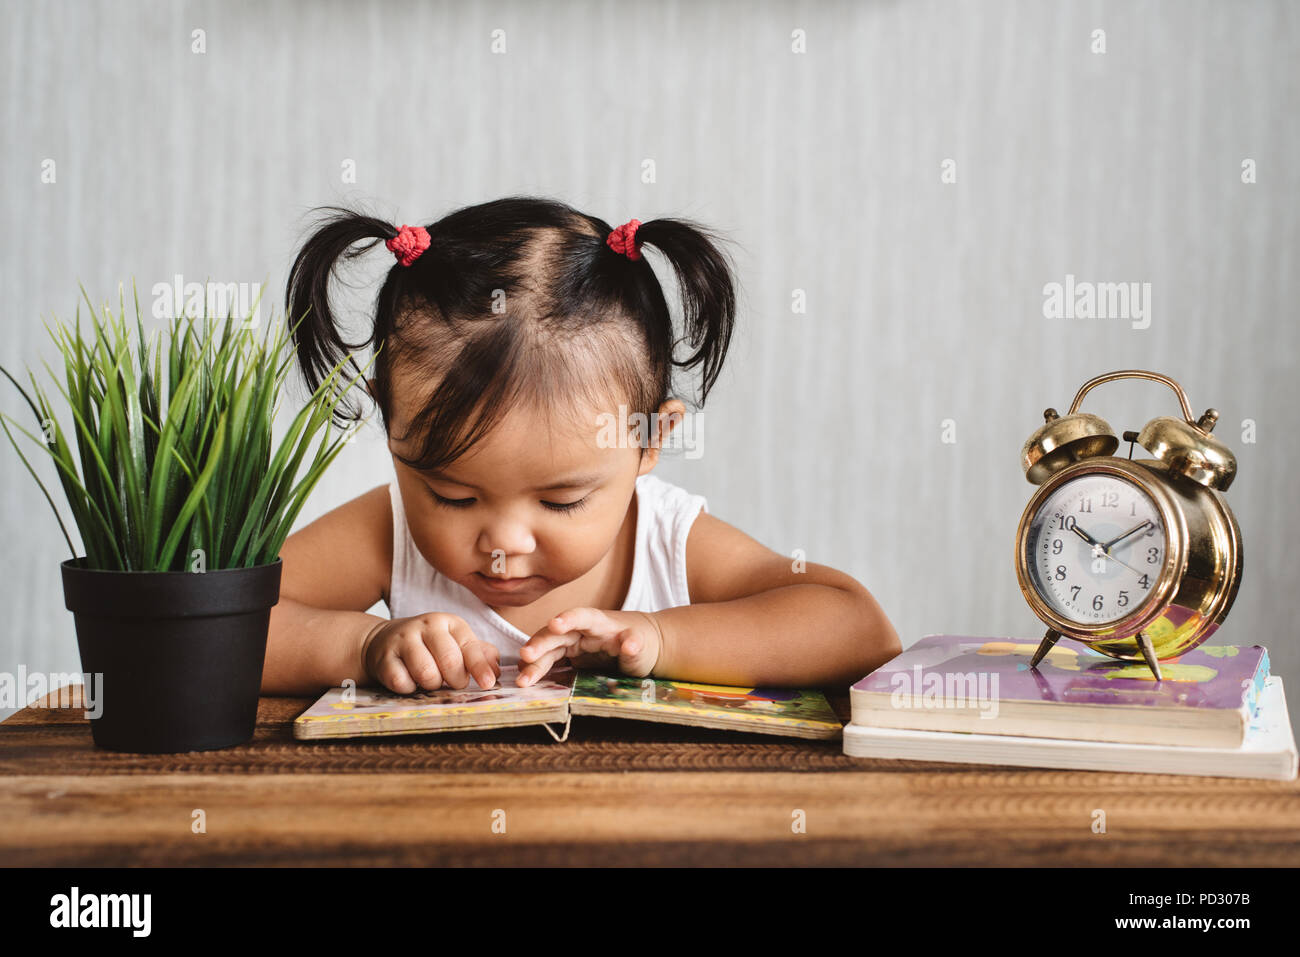 asian baby toddler reading a book on wooden table. concept of early education, child learning, development,  growth and parenting Stock Photo